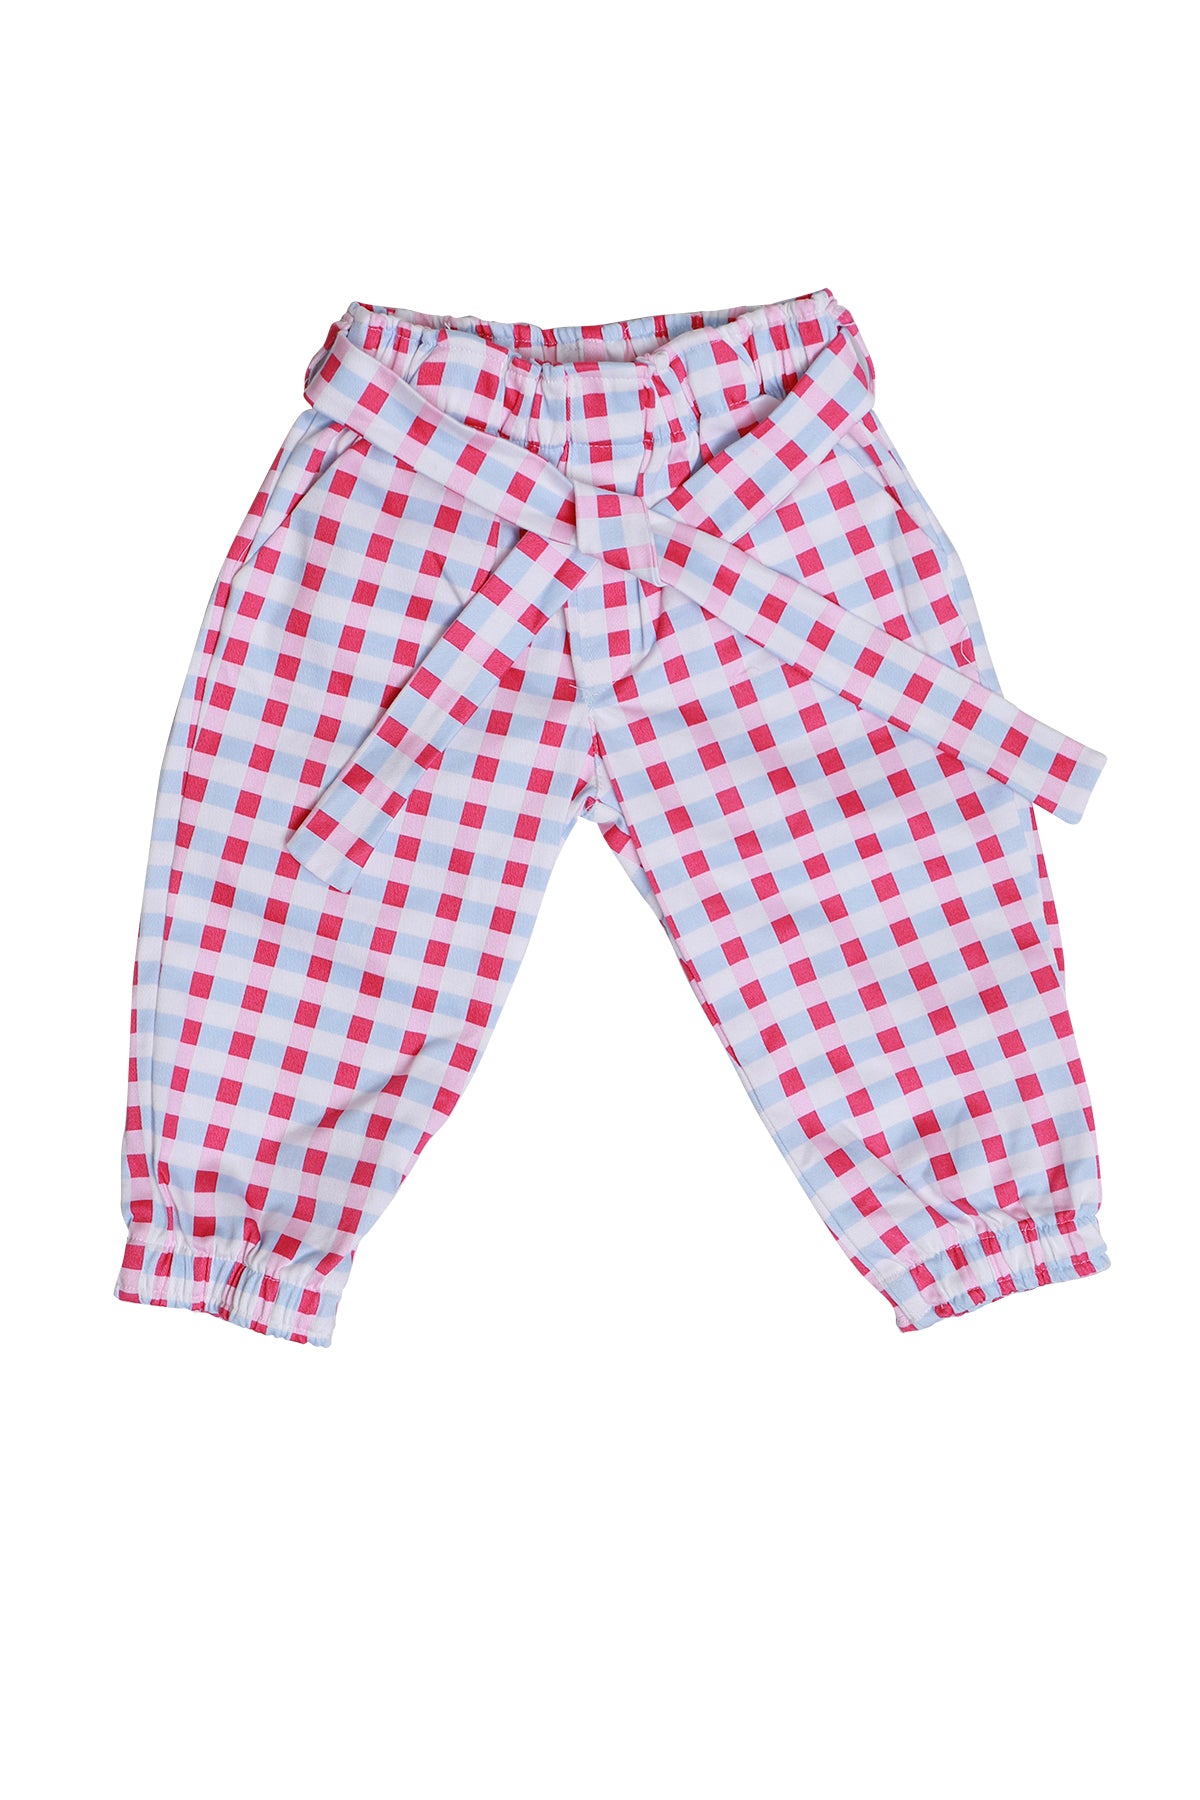 Ozone Baby Girls Printed Casual Pant